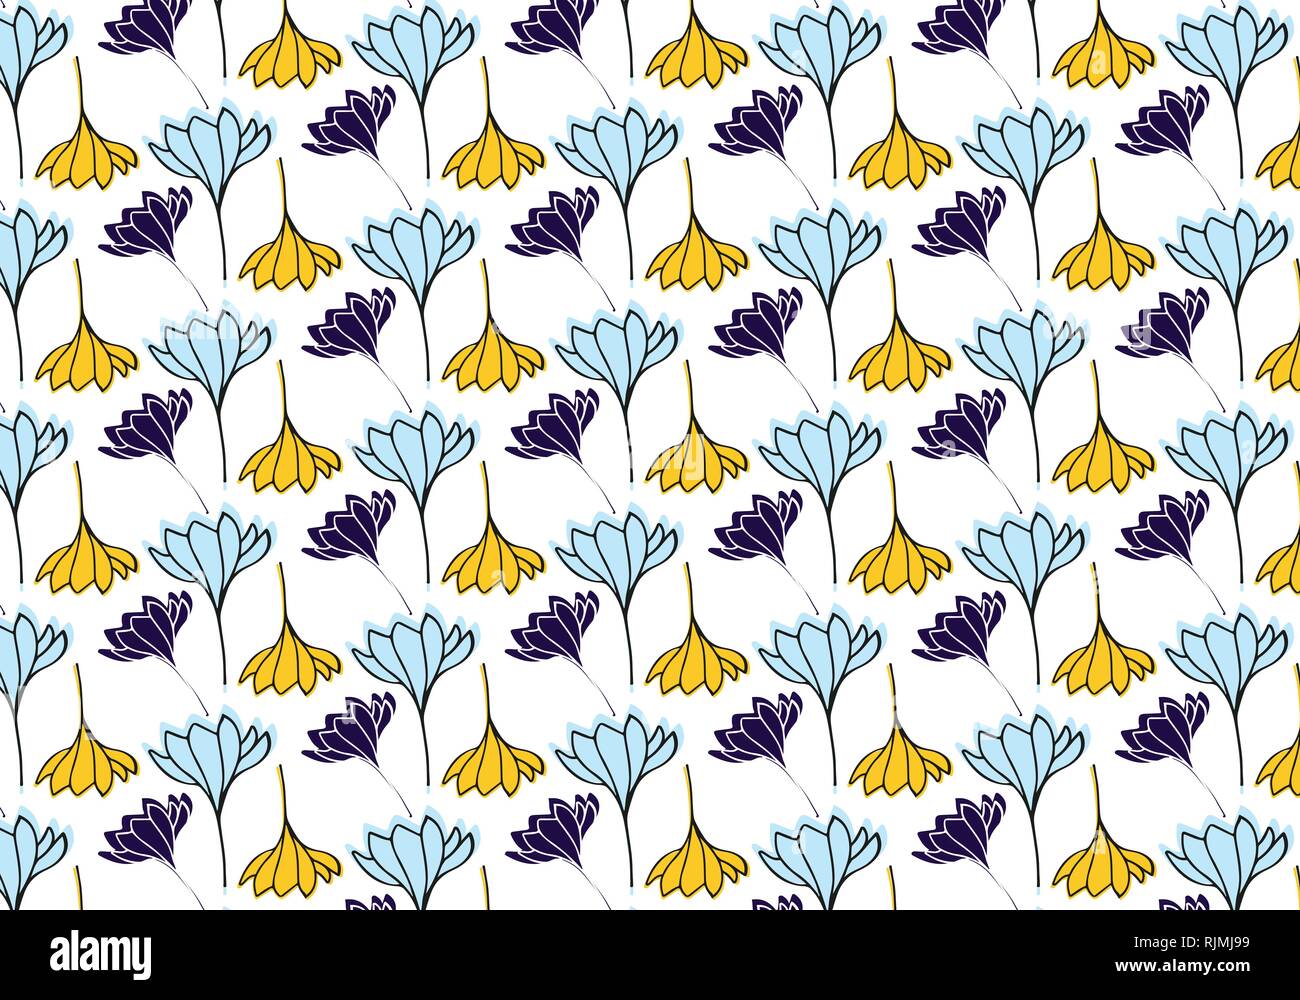 Floral elements vector pattern in blue and yellow color palette Stock Vector